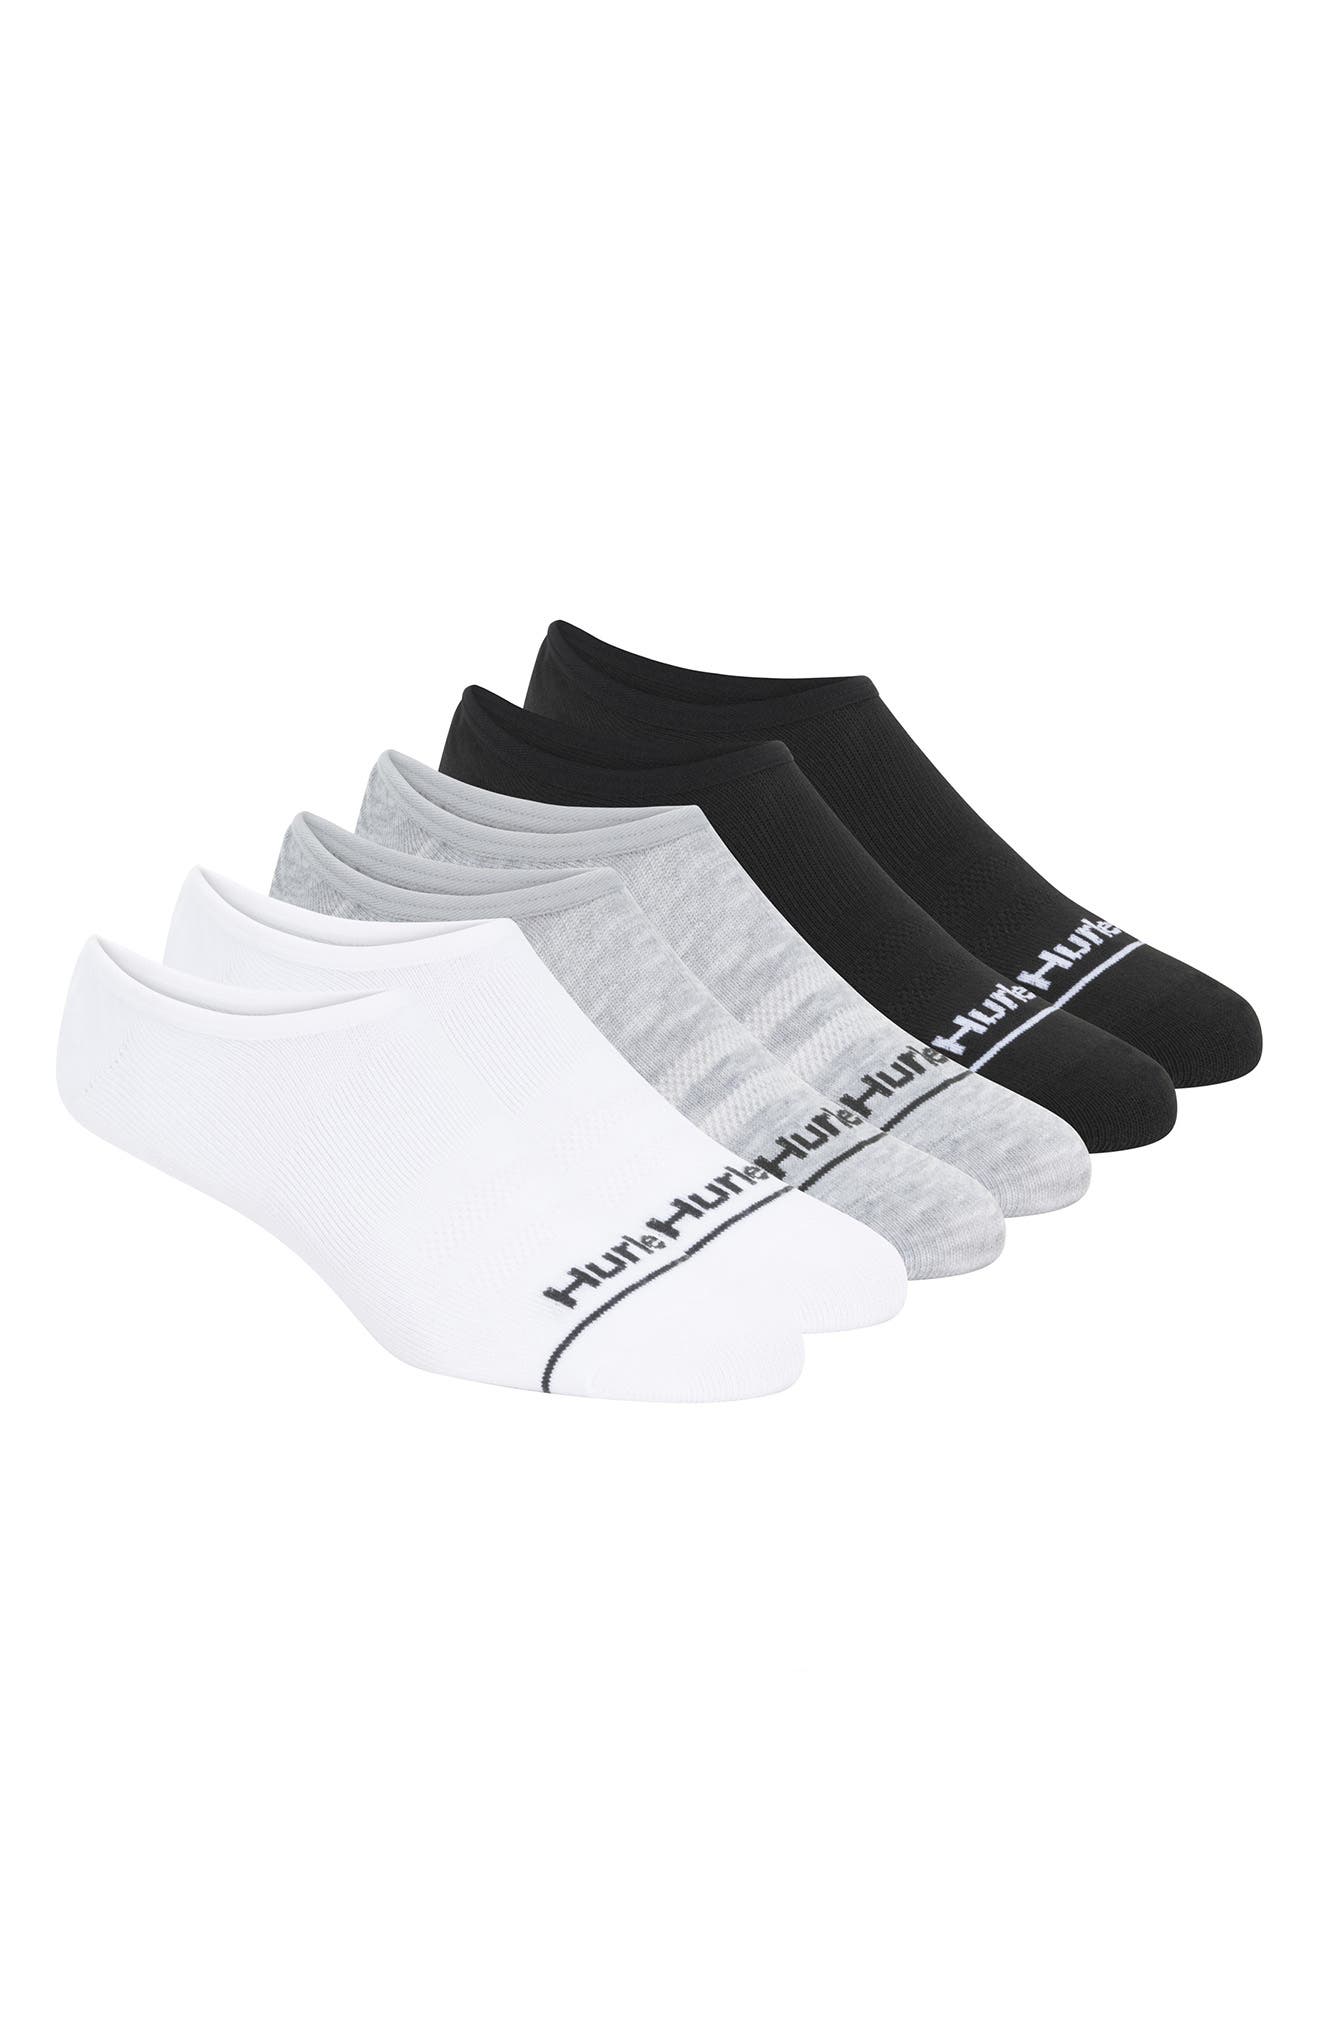 Hurley womens 6 Pack Non Terry Low Cut Socks